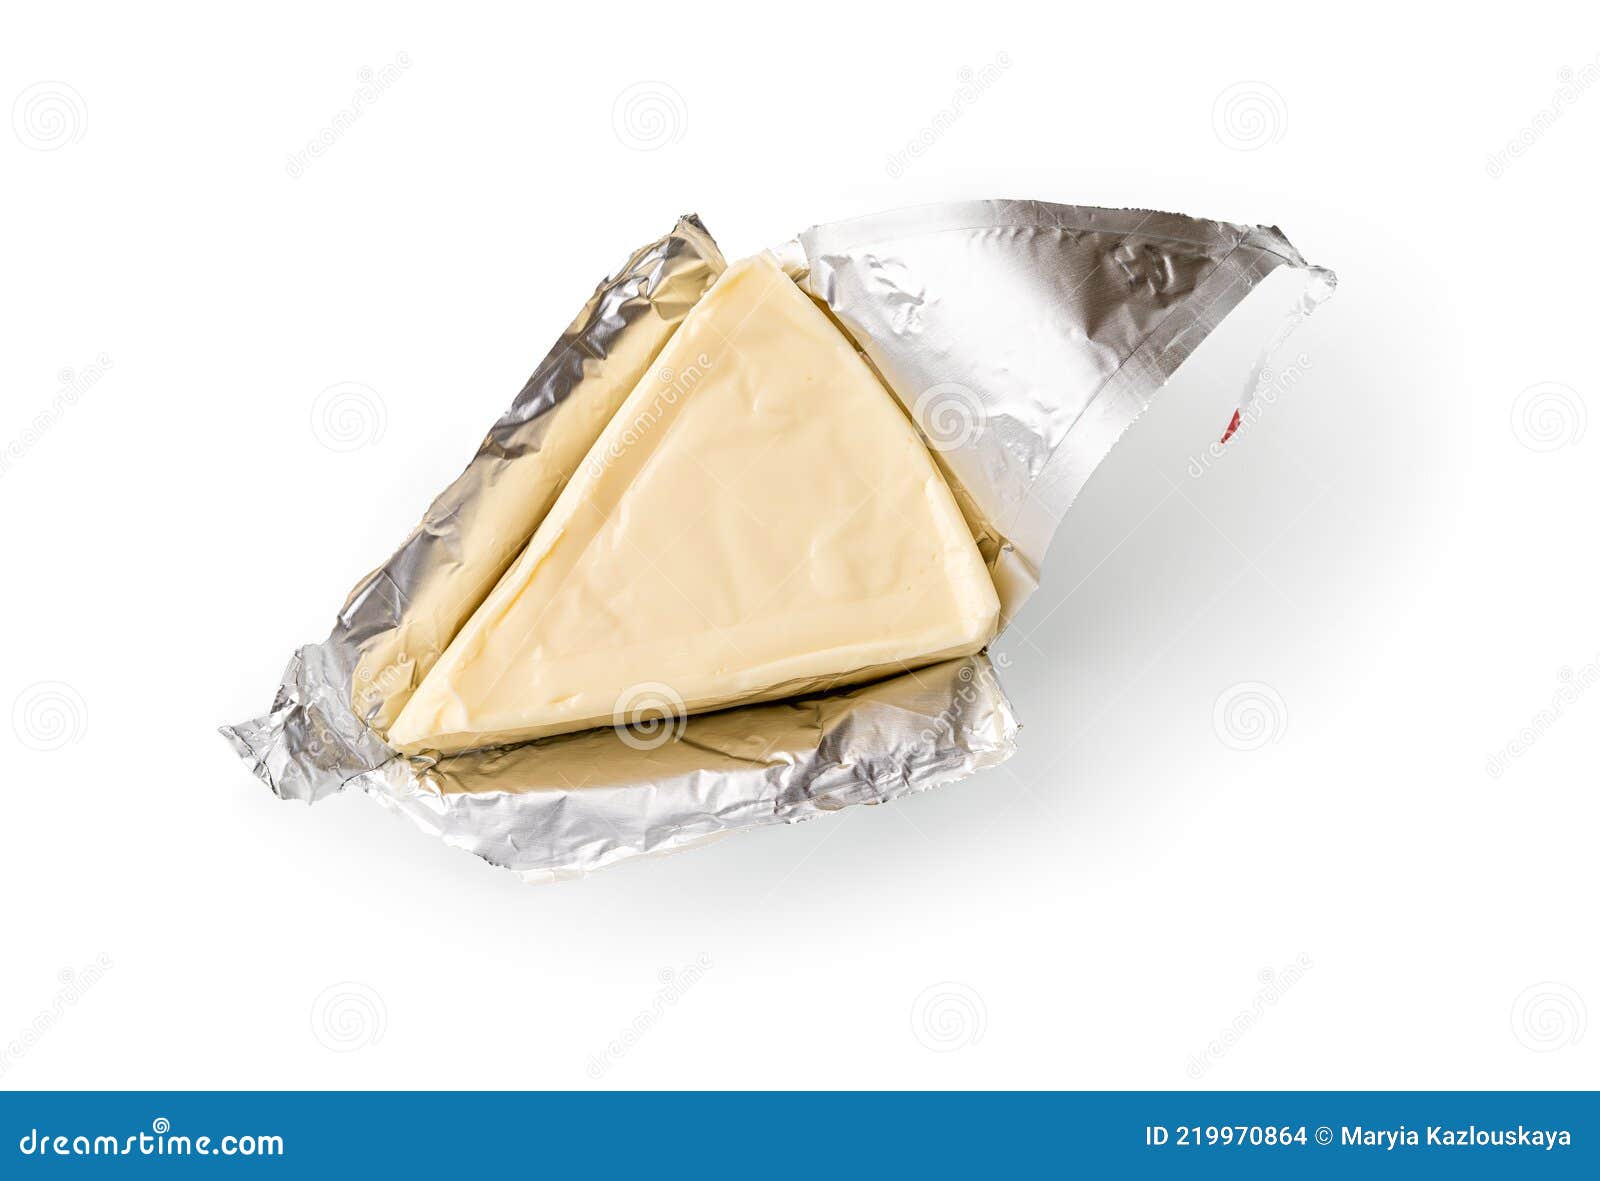 foil wrapped processed creame cheese slice  on a white background. small triangular piece of portioned soft cheese in a